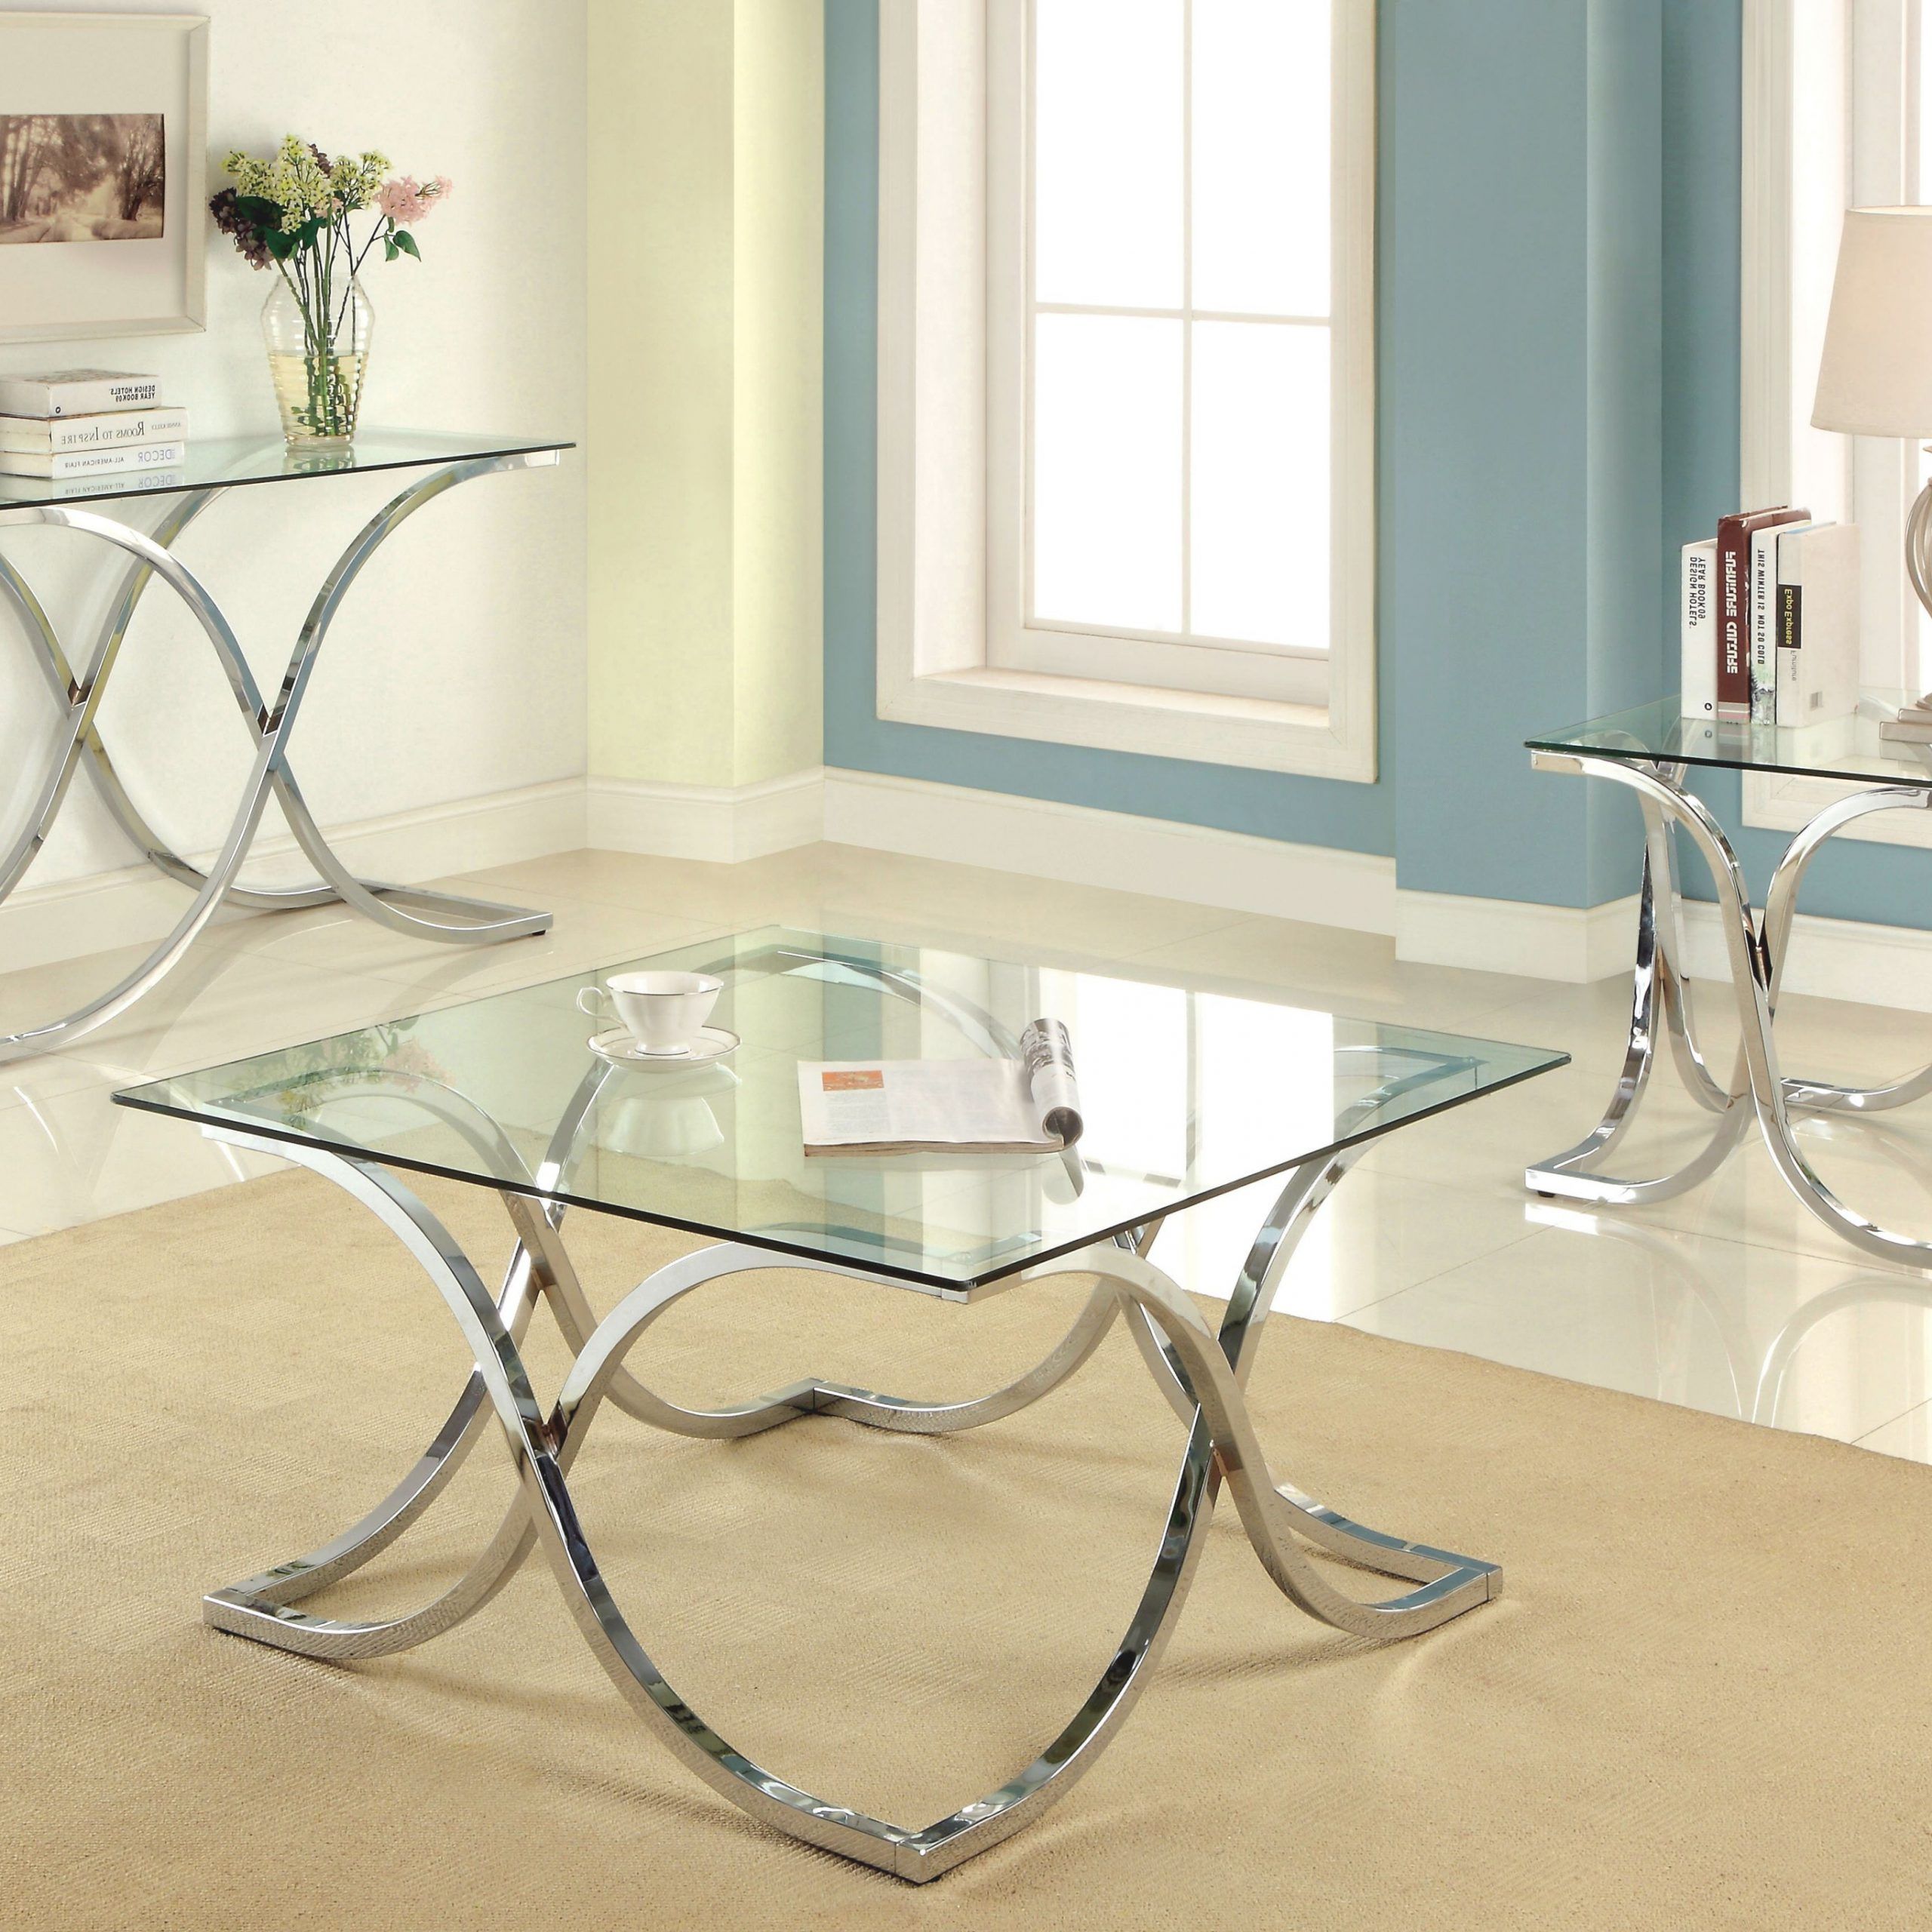 Most Recent 3 Piece Coffee Tables In Elegant 3 Piece Glass Coffee Table Set – Awesome Decors (Gallery 3 of 20)